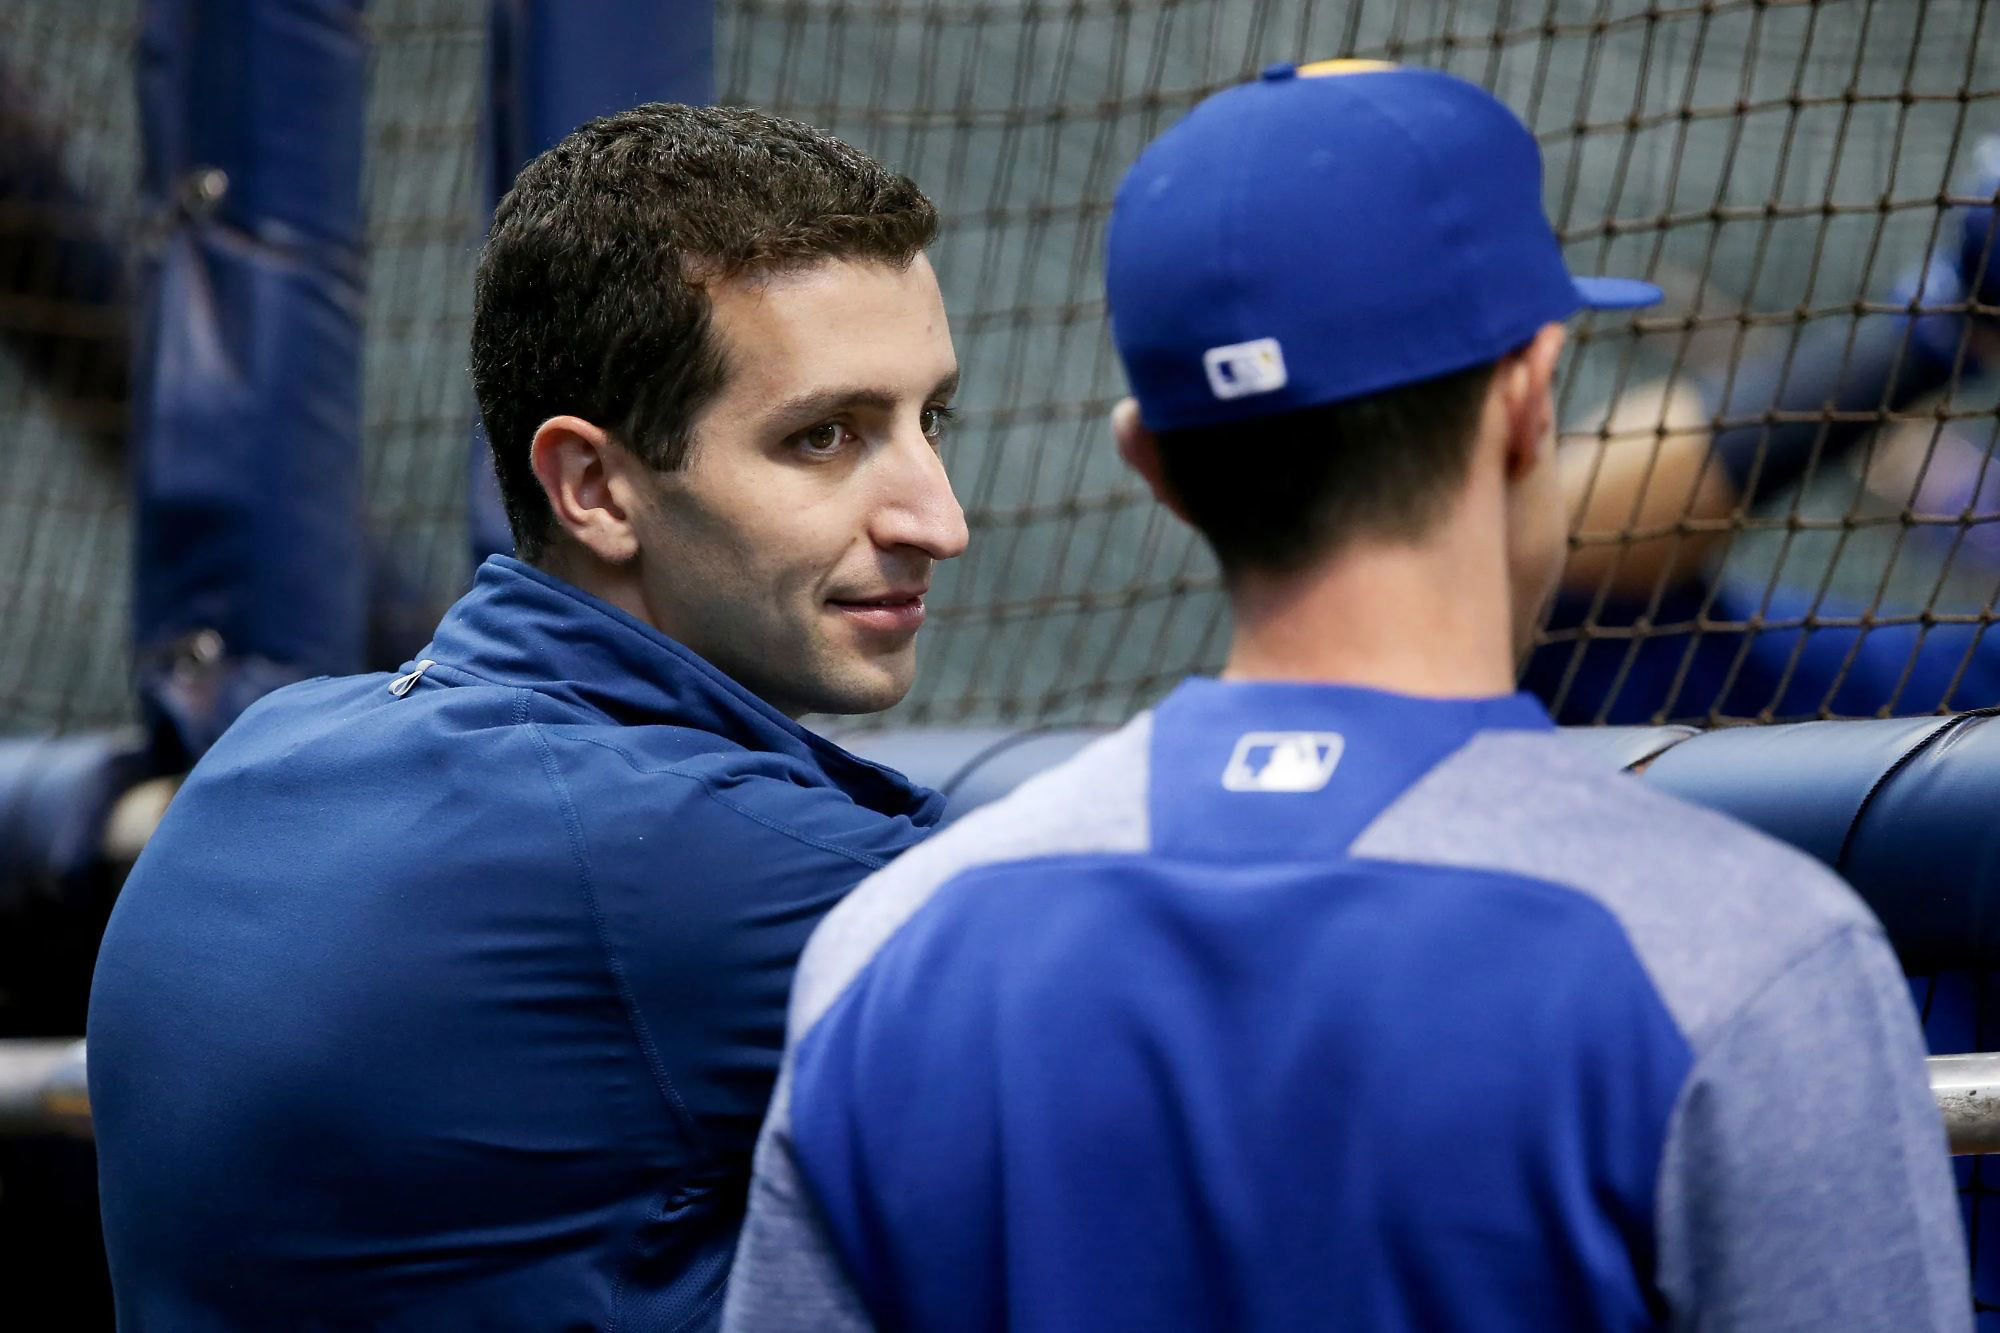 Mets hire David Stearns: Here are the biggest questions awaiting